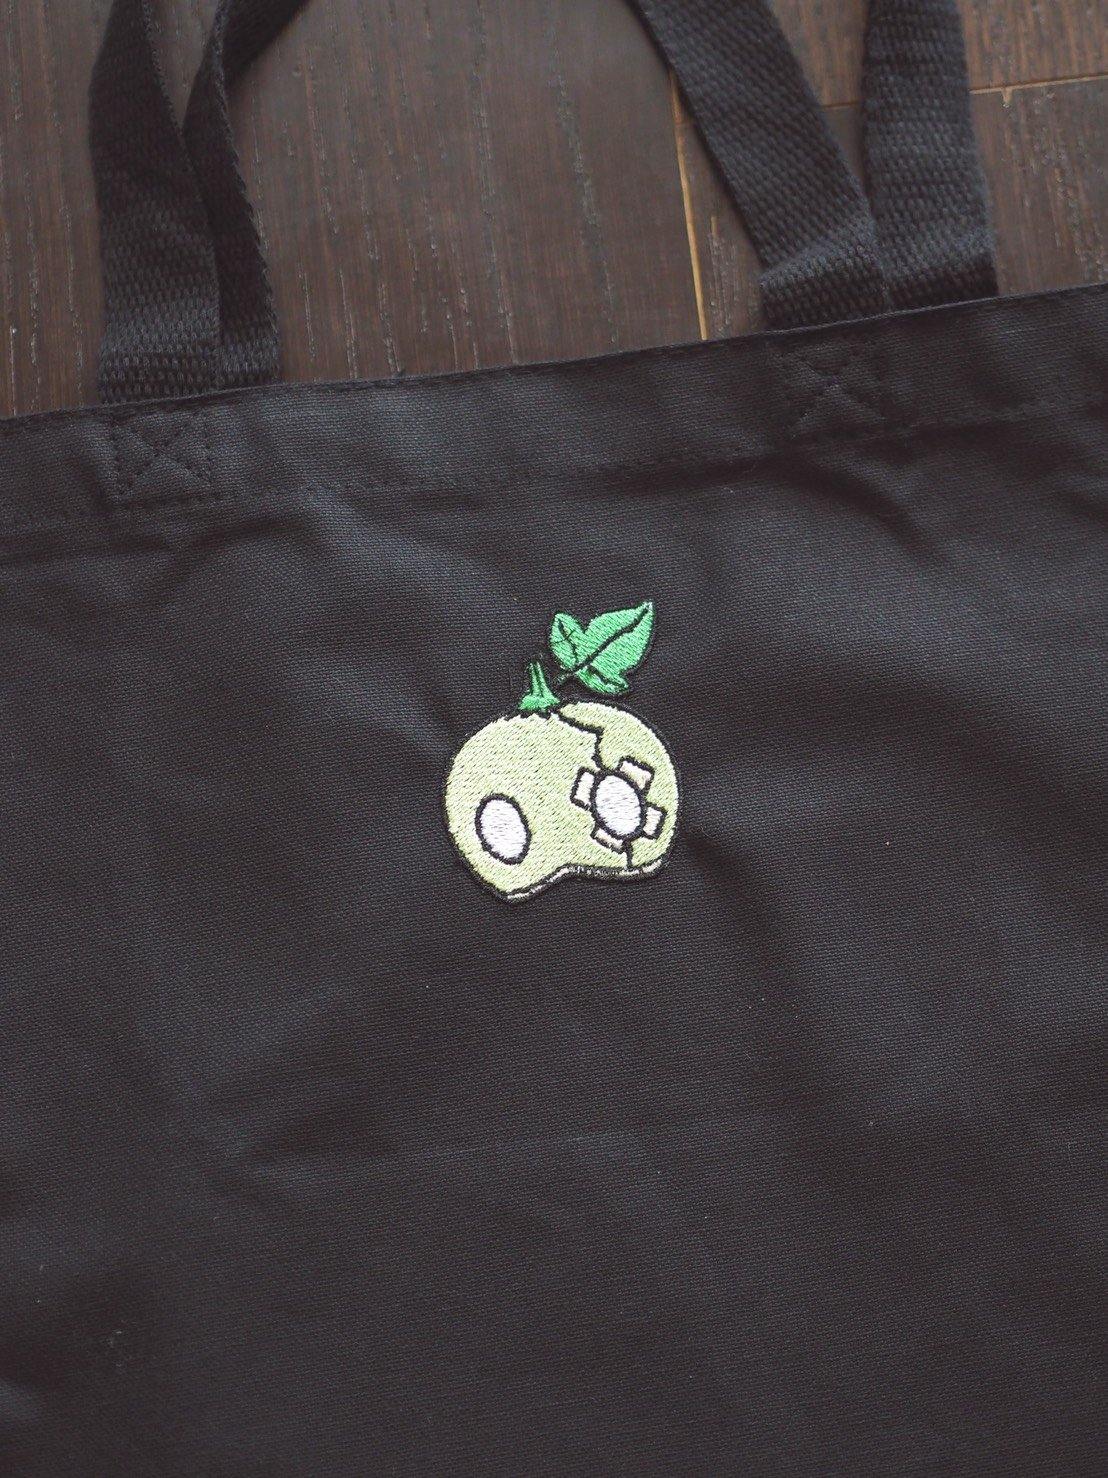 Dr. Stone Suika Embroidery Totes Bags - Moko's Boutique